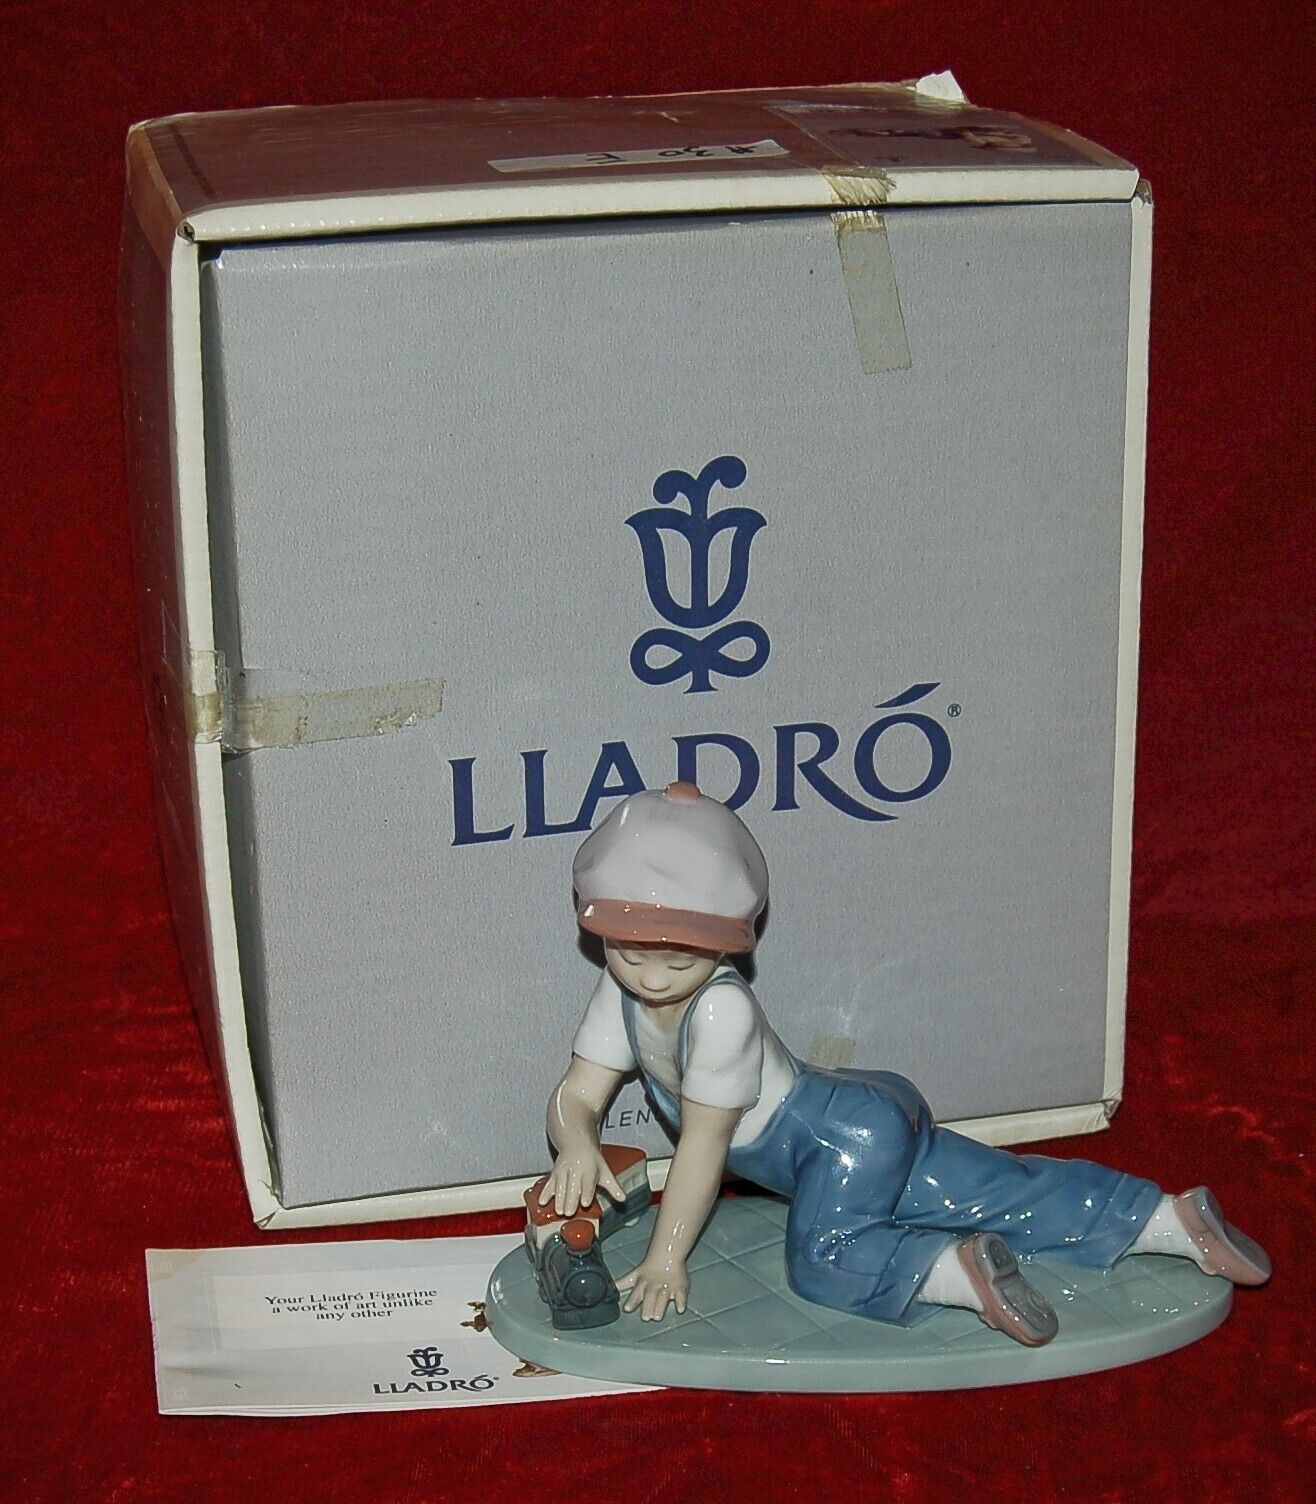 LLADRO Porcelain ALL ABOARD #7619 In Original Box Made in Spain